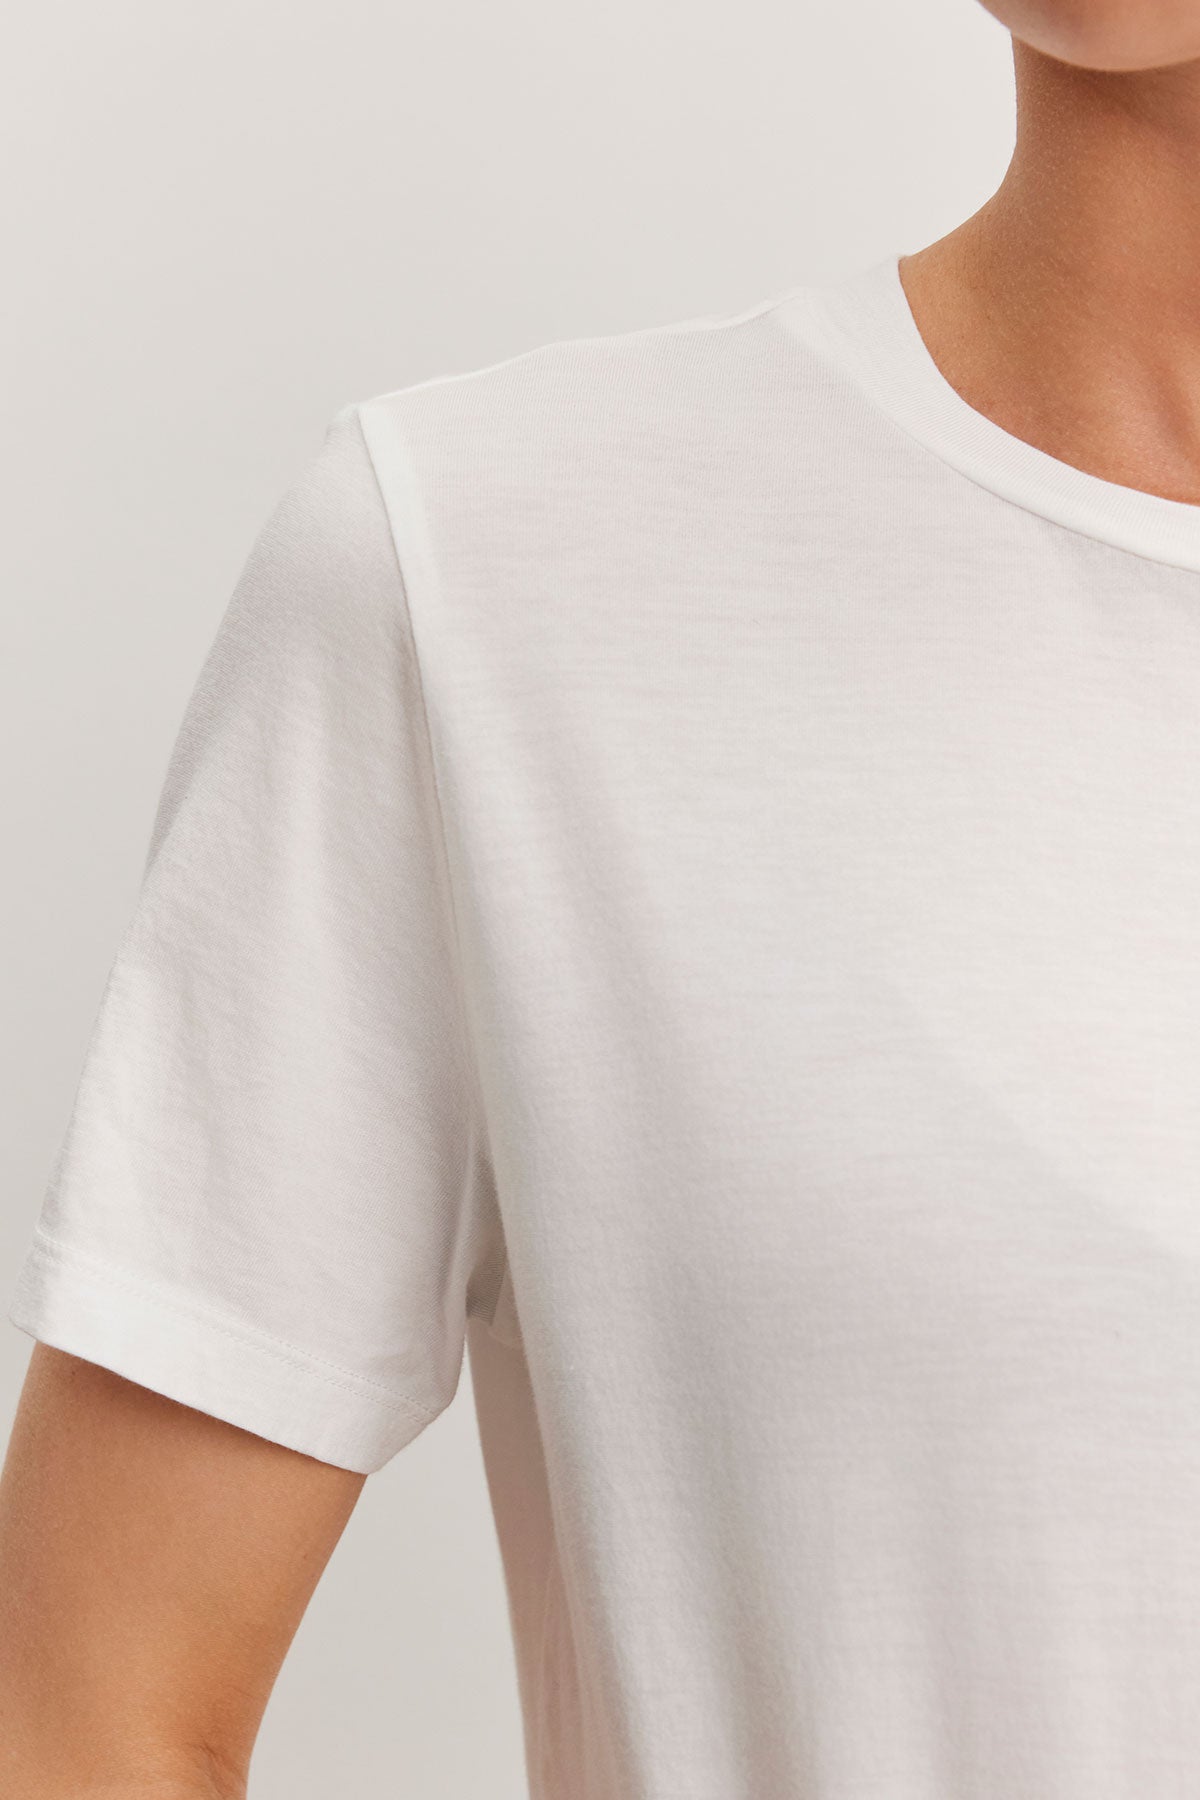 Close-up of a person wearing a Velvet by Graham & Spencer RYAN TEE in plain white, relaxed fit, focusing on the shoulder and sleeve area. The background is neutral.-36998721896641